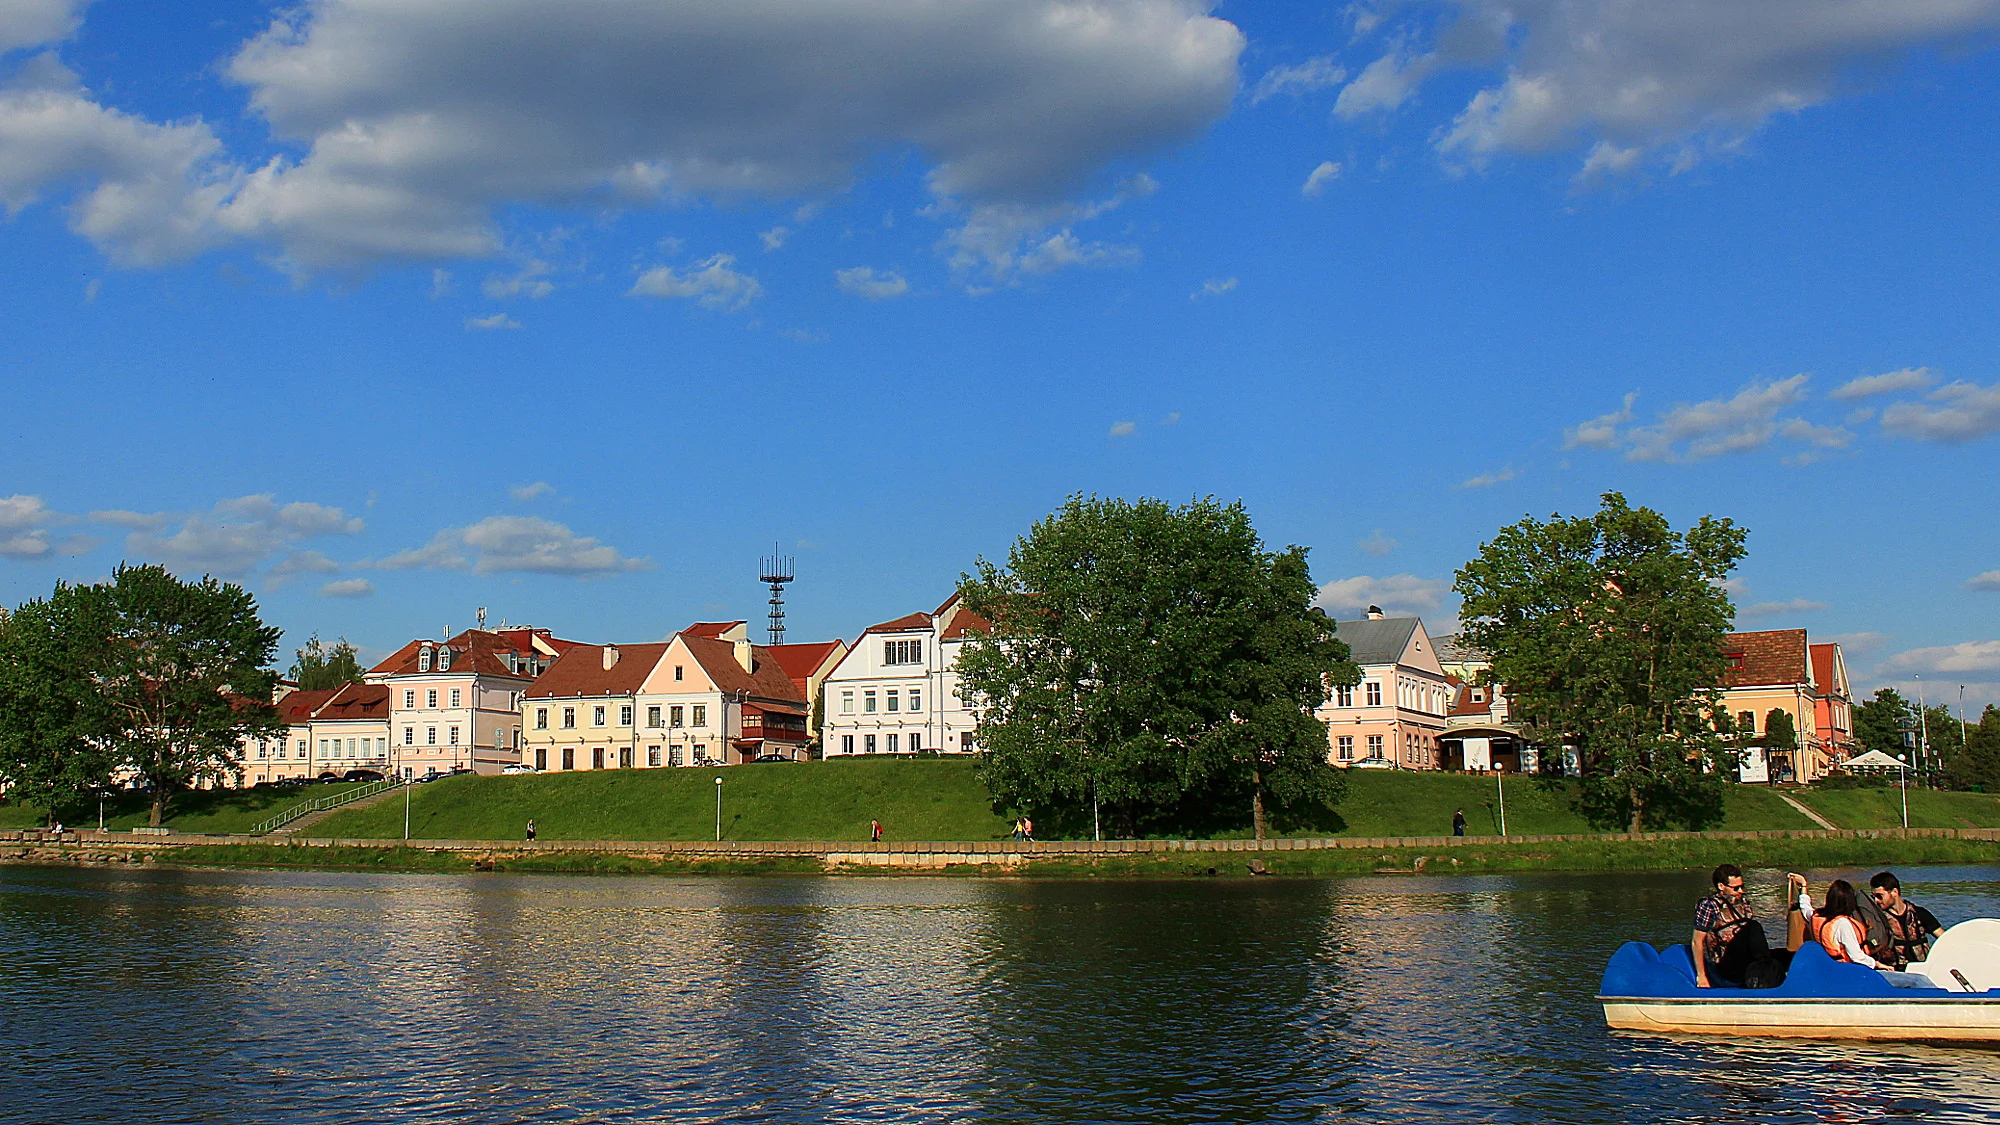 Troitskoye Predmestie or the Trinity Suburb is the old town of Minsk. Pictured on a beautiful sunny day with the river in front. Hostel Trinity is one of the few hostels for backpacking in Belarus.